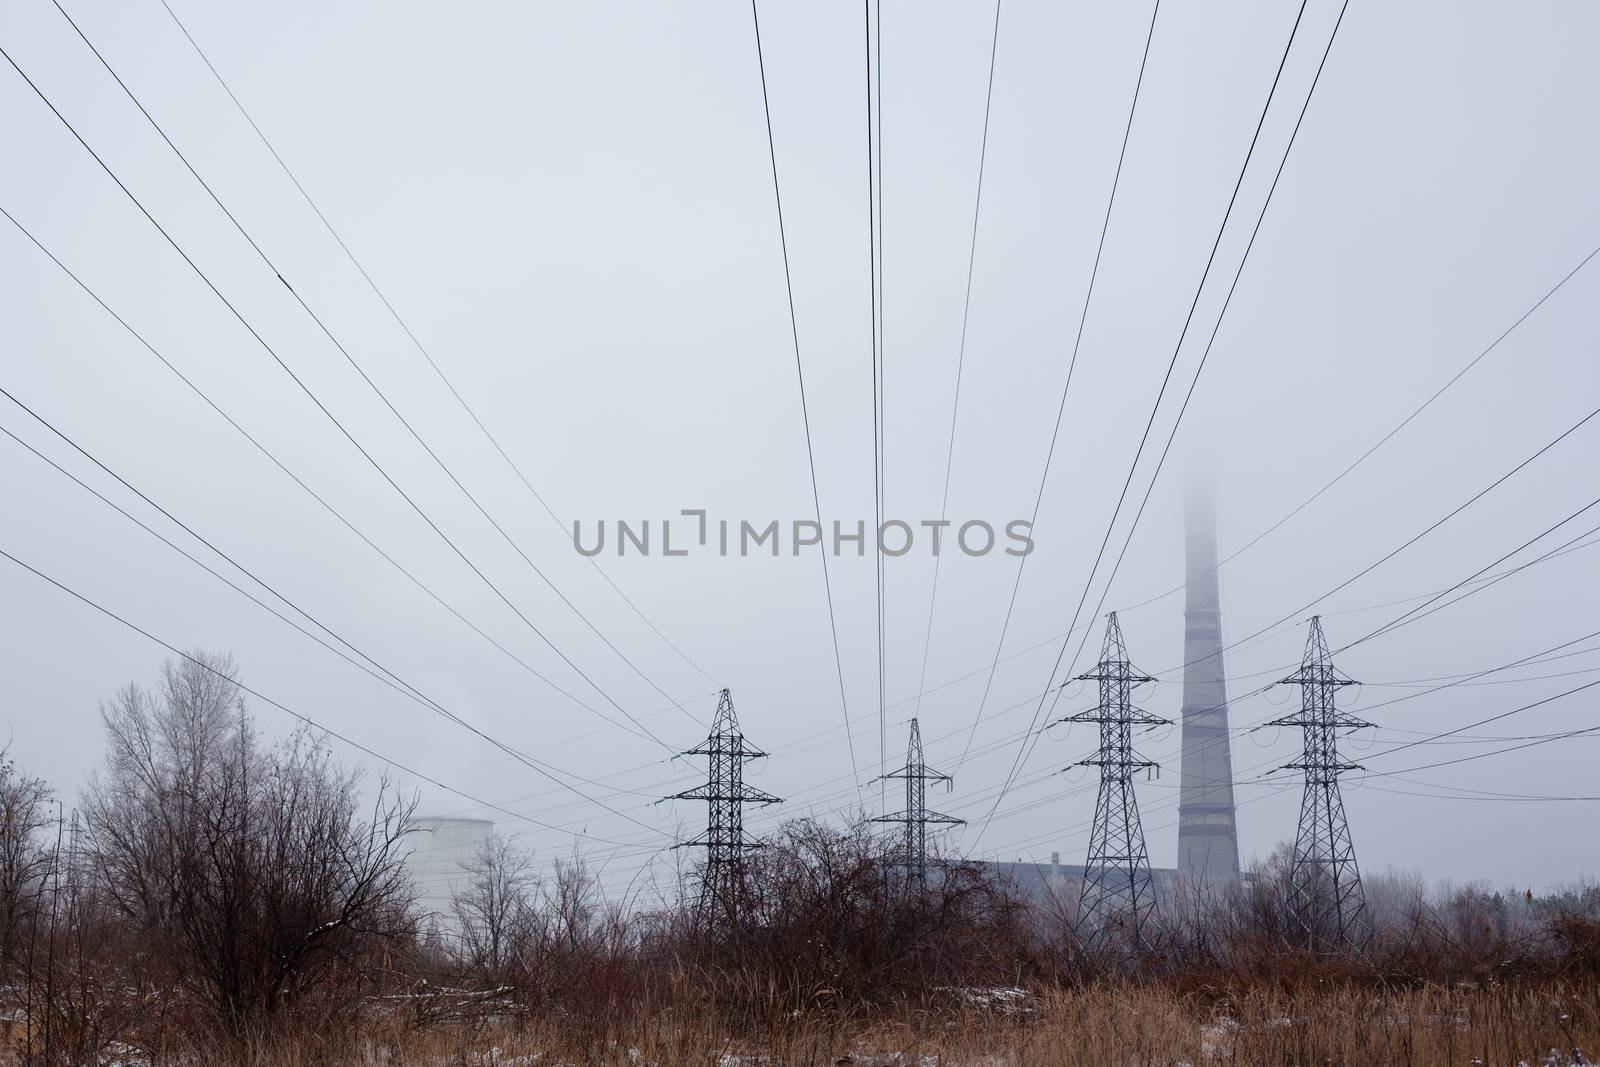 Electricity pylons, power lines, smoke stack and cooling tower of the industrial plant in the foggy winter day.